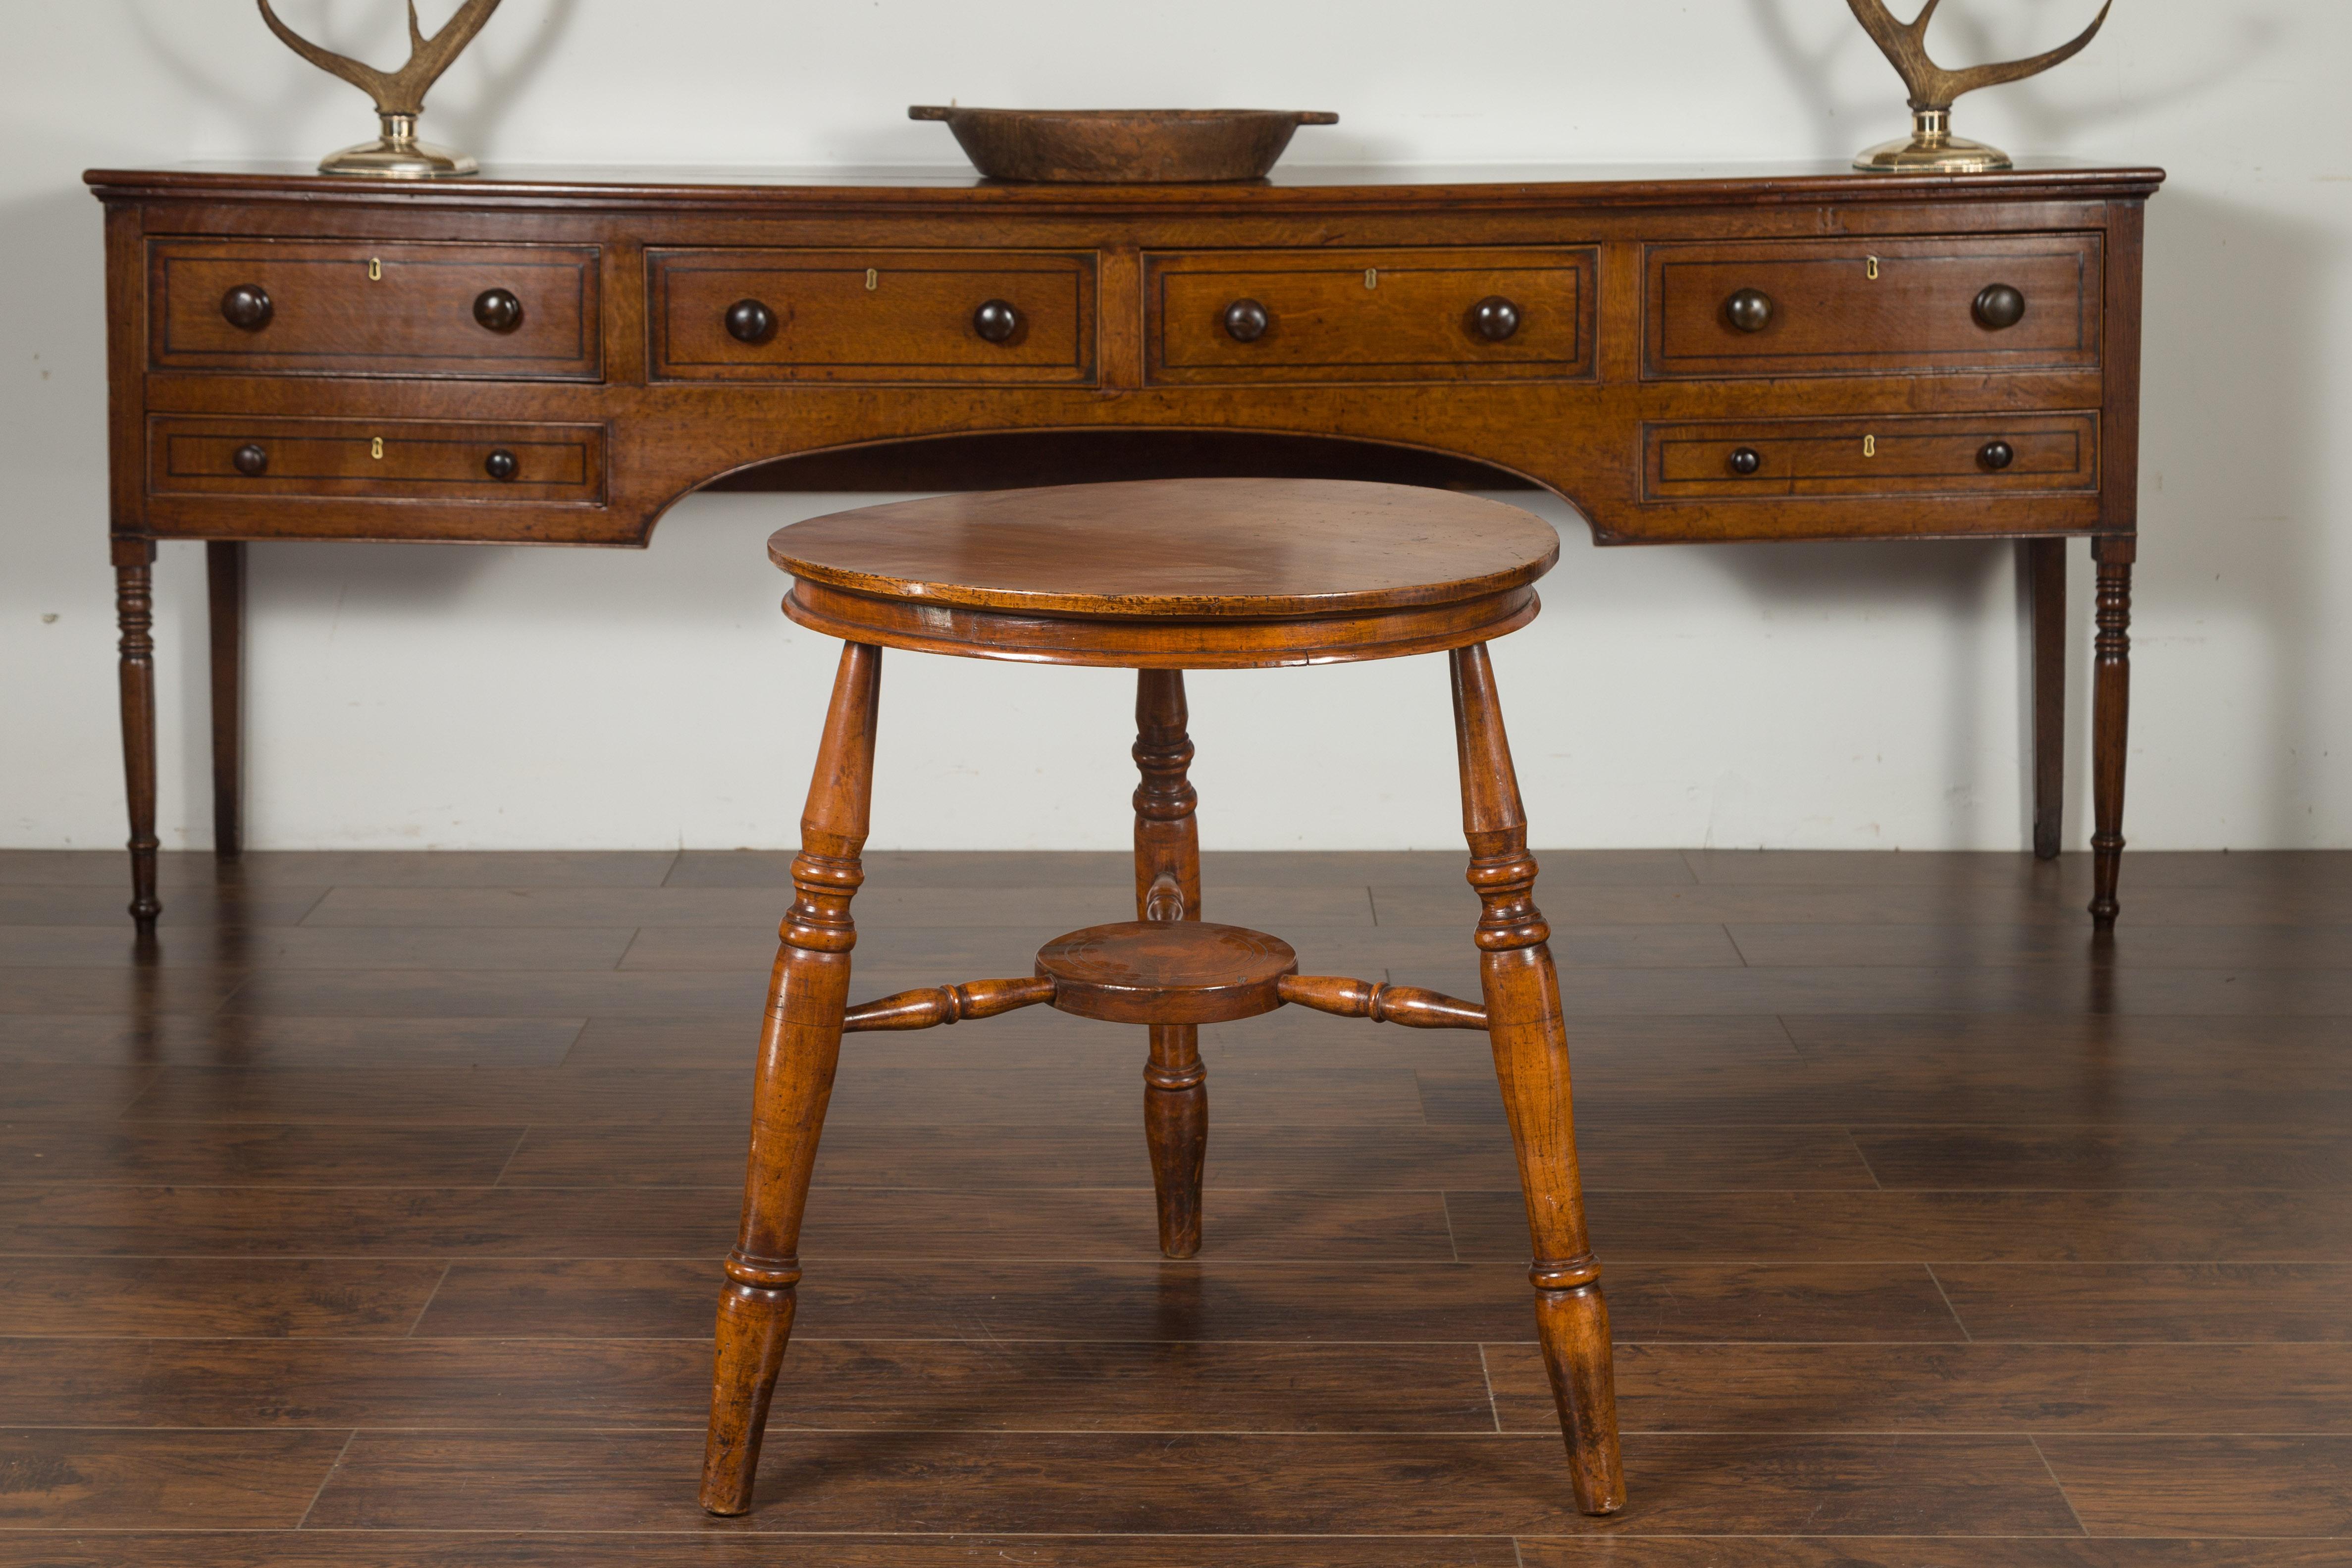 19th Century English 1860s Cricket Table with Turned Legs and Circular Sycamore Top For Sale